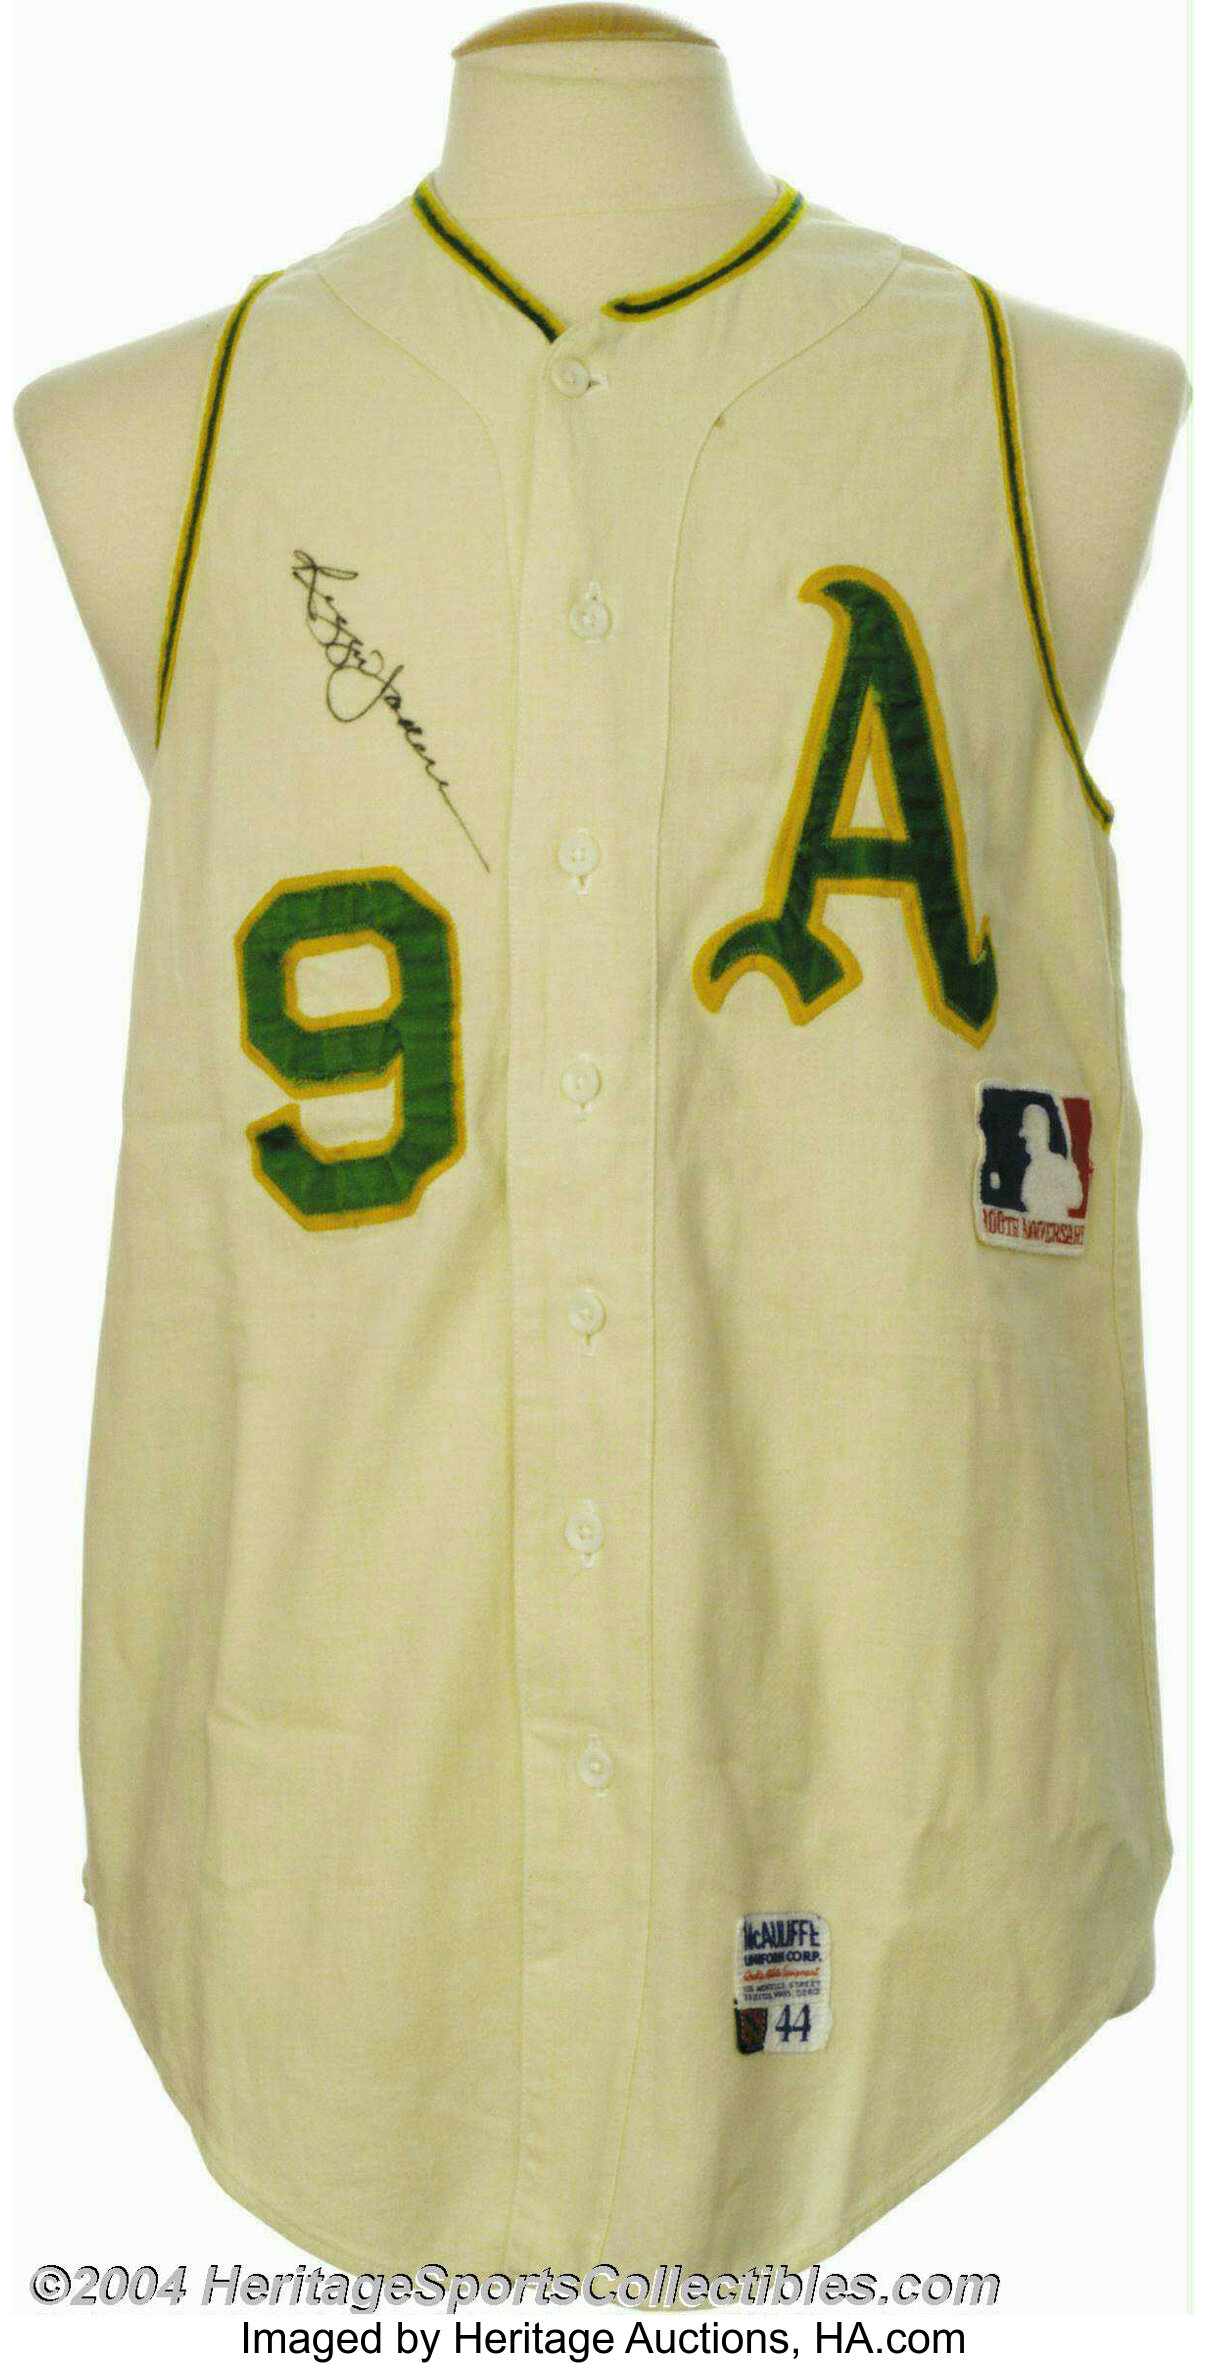 1989 Reggie Jackson Game Used Signed Jersey. Shortly after, Lot #10233